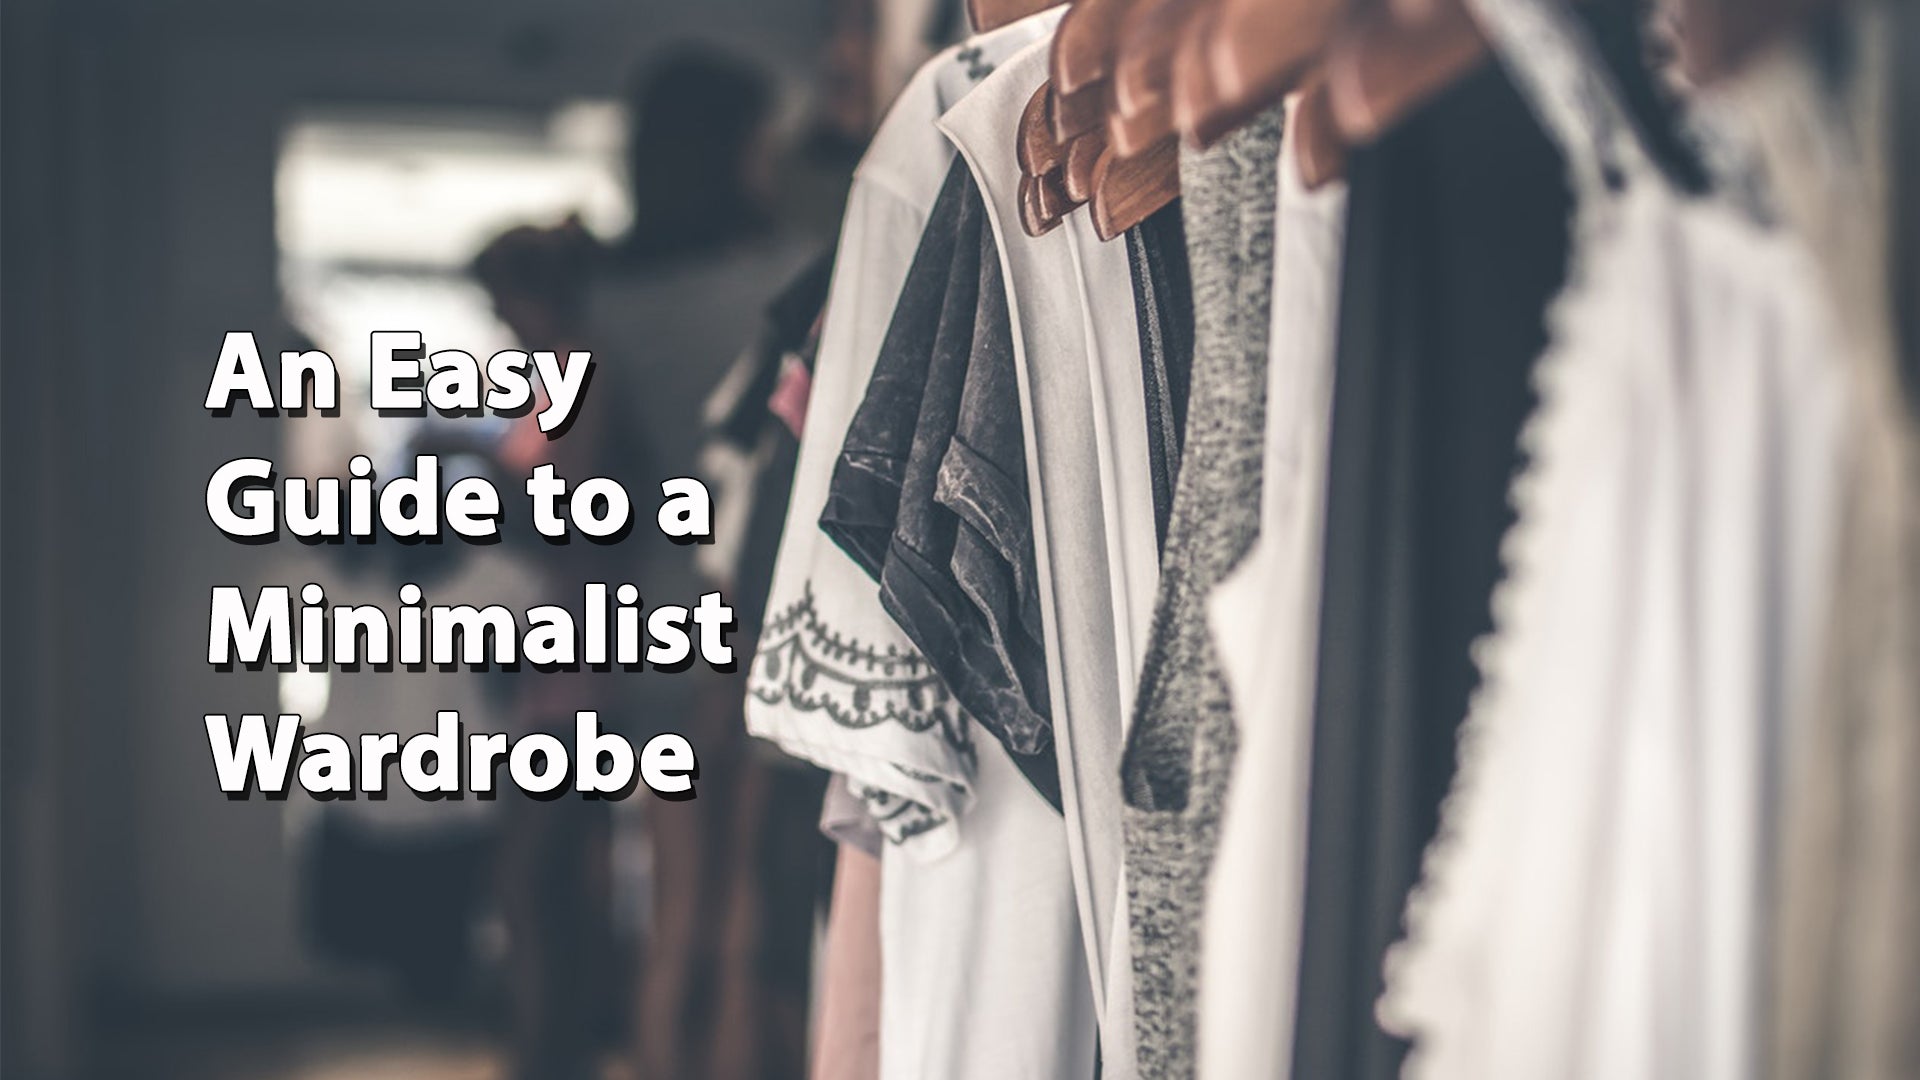 An easy guide to a minimalist wardrobe